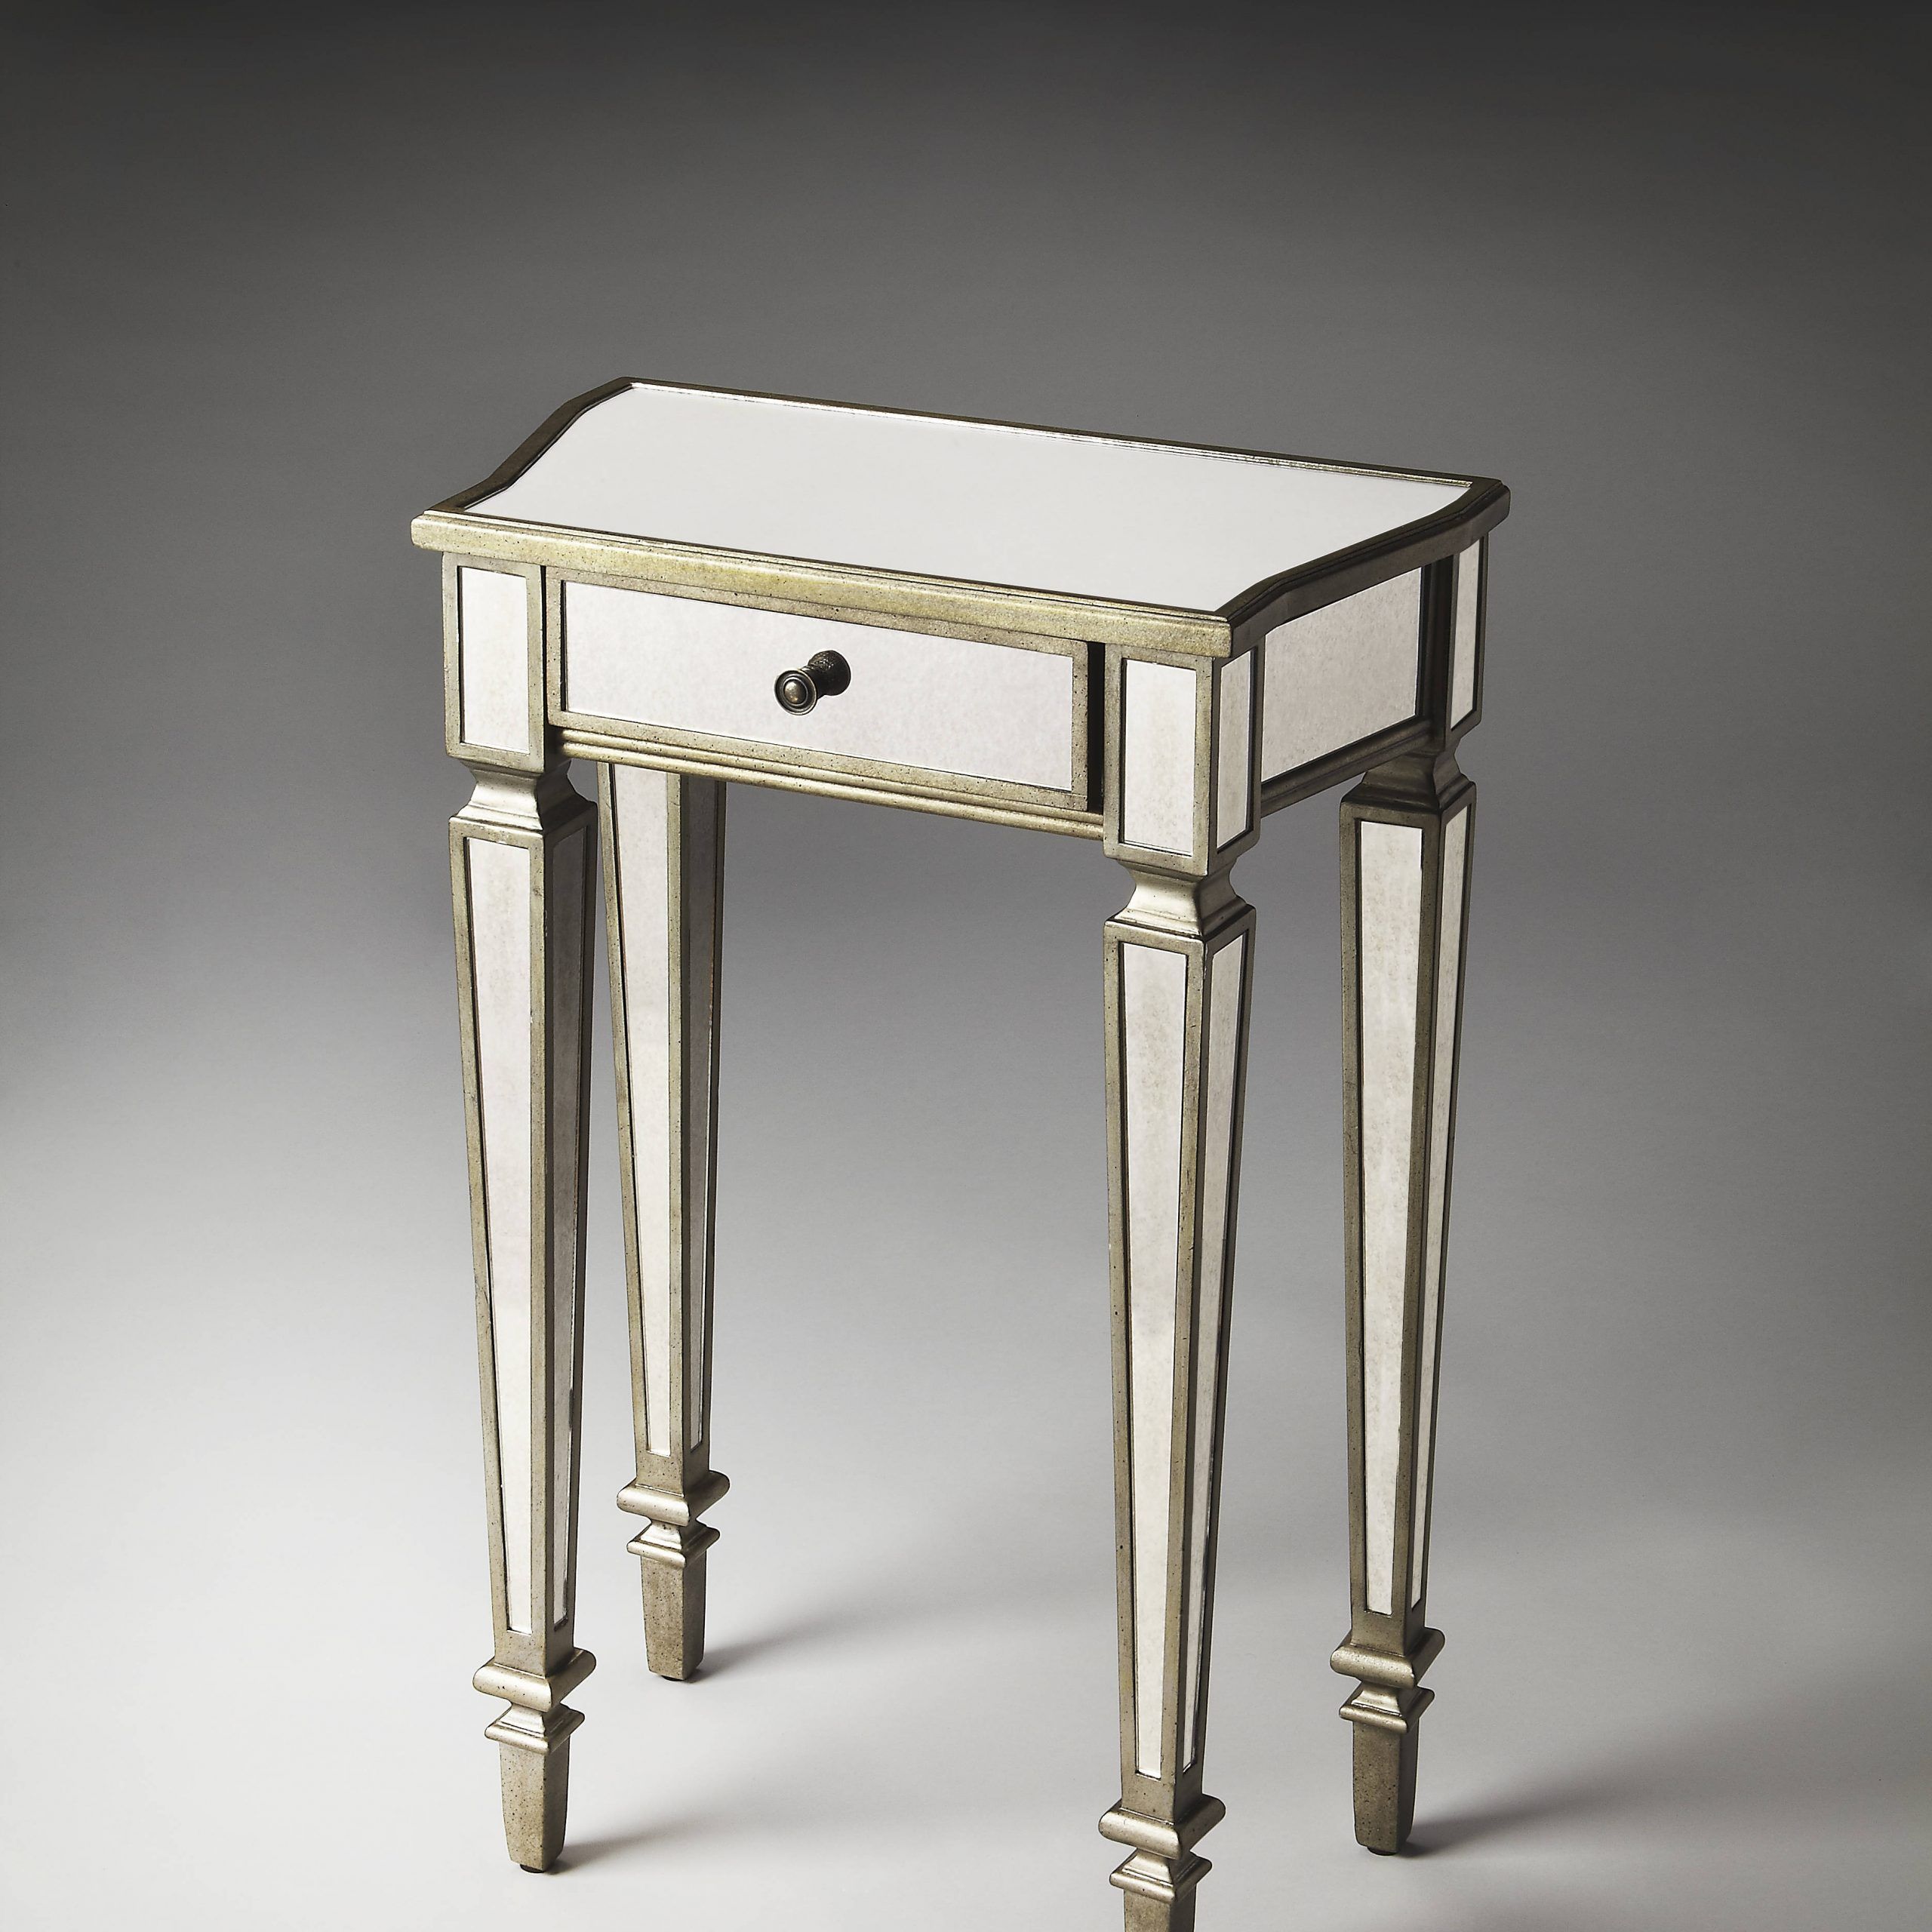 Masterpiece Silver Mirror Poplar Mdf Mirrored Glass Console Table | The Inside Mirrored And Silver Console Tables (View 7 of 20)